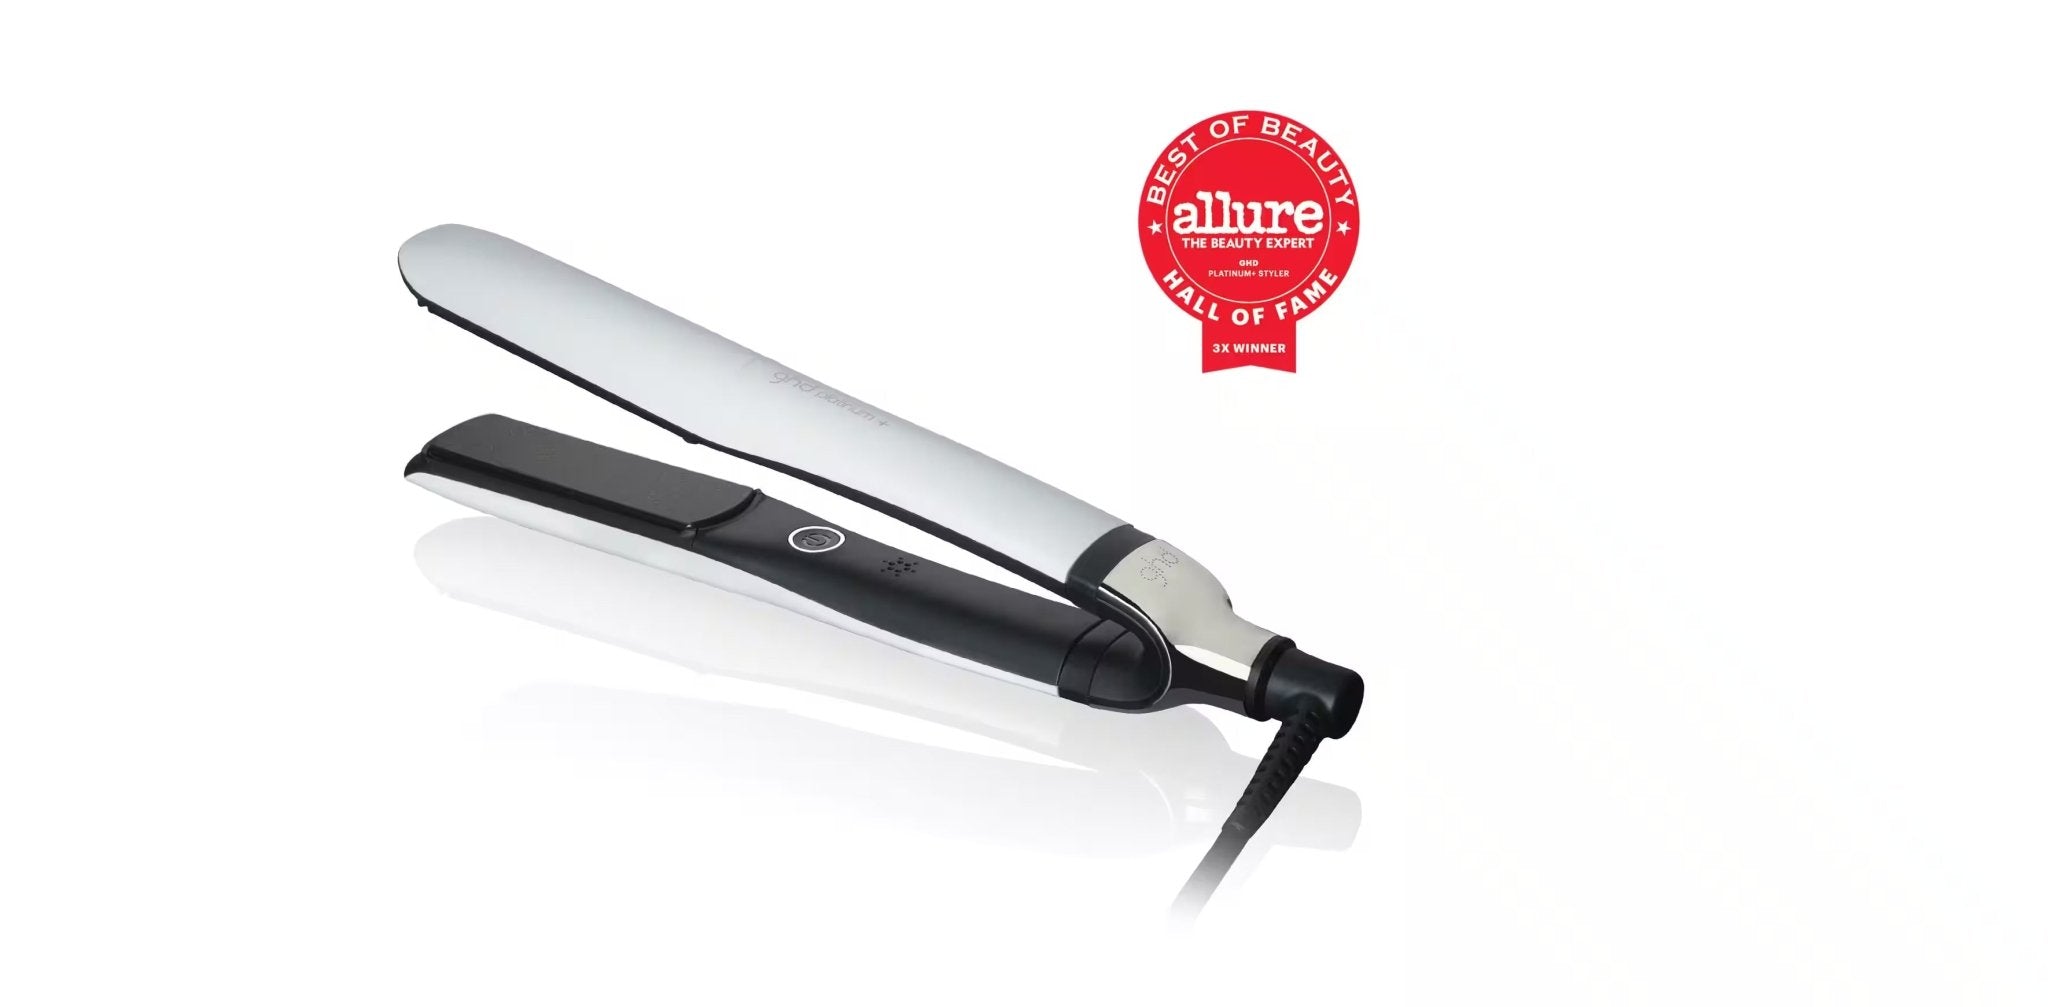 A GHD PLATINUM+ STYLER - 1" FLAT IRON with a silver top plate and a black bottom plate, featuring a red "Allure Best of Beauty Hall of Fame" award badge in the background, perfect for creating flat iron waves and personalized styling.